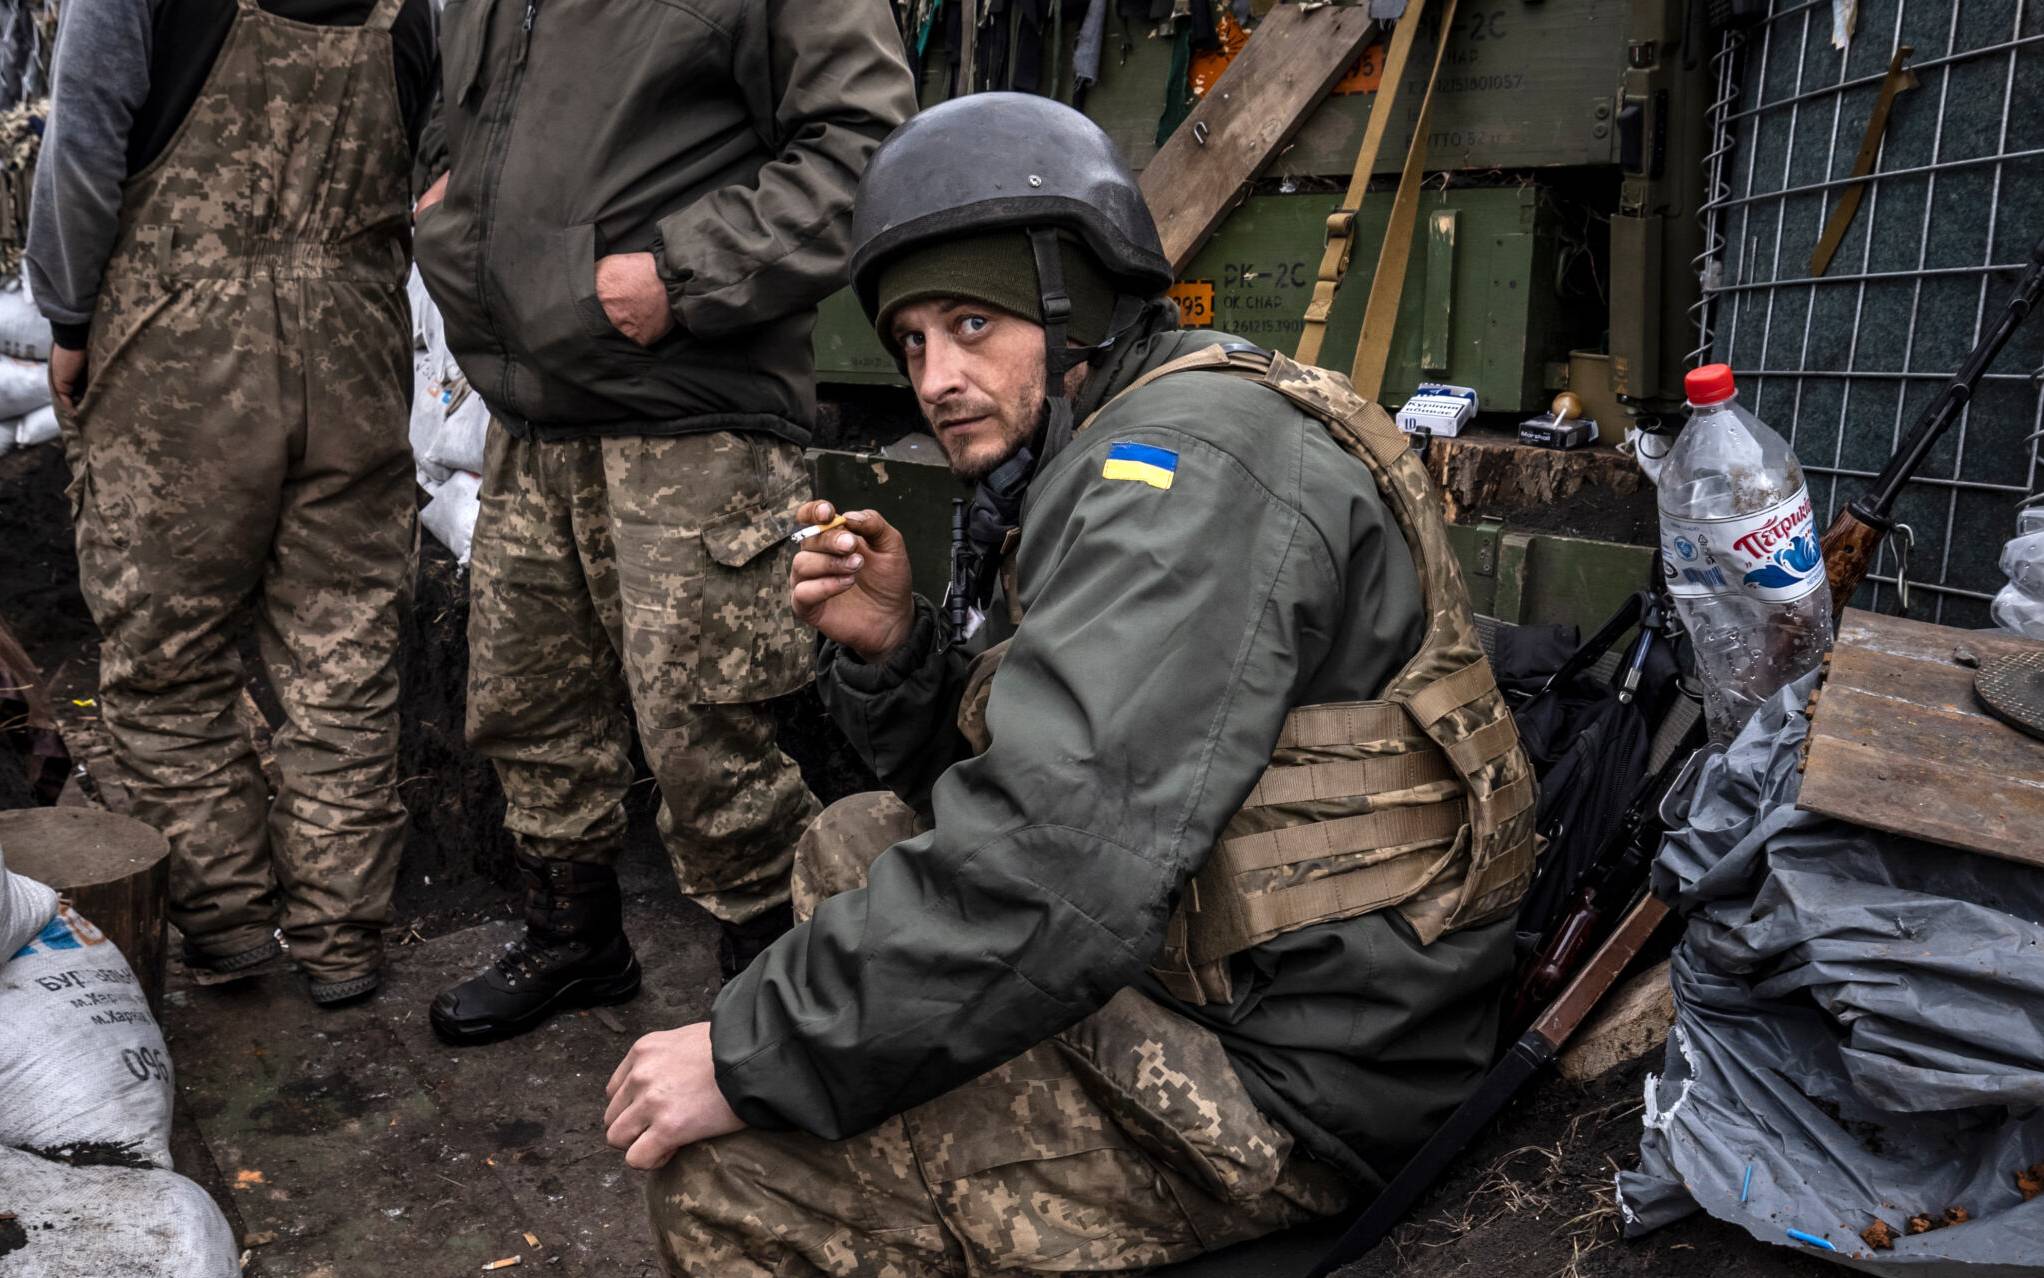 A Ukrainian serviceman smokes a cigaret in a trench at the front line east of Kharkiv on March 31, 2022. - Russian forces are repositioning in Ukraine to strengthen their offensive on the Donbass, Nato said on March 31, 2022, on the 36th day of the Russian-Ukrainian conflict, as shelling continues in Kharkiv (north) and Mariupol (south). (Photo by FADEL SENNA / AFP)